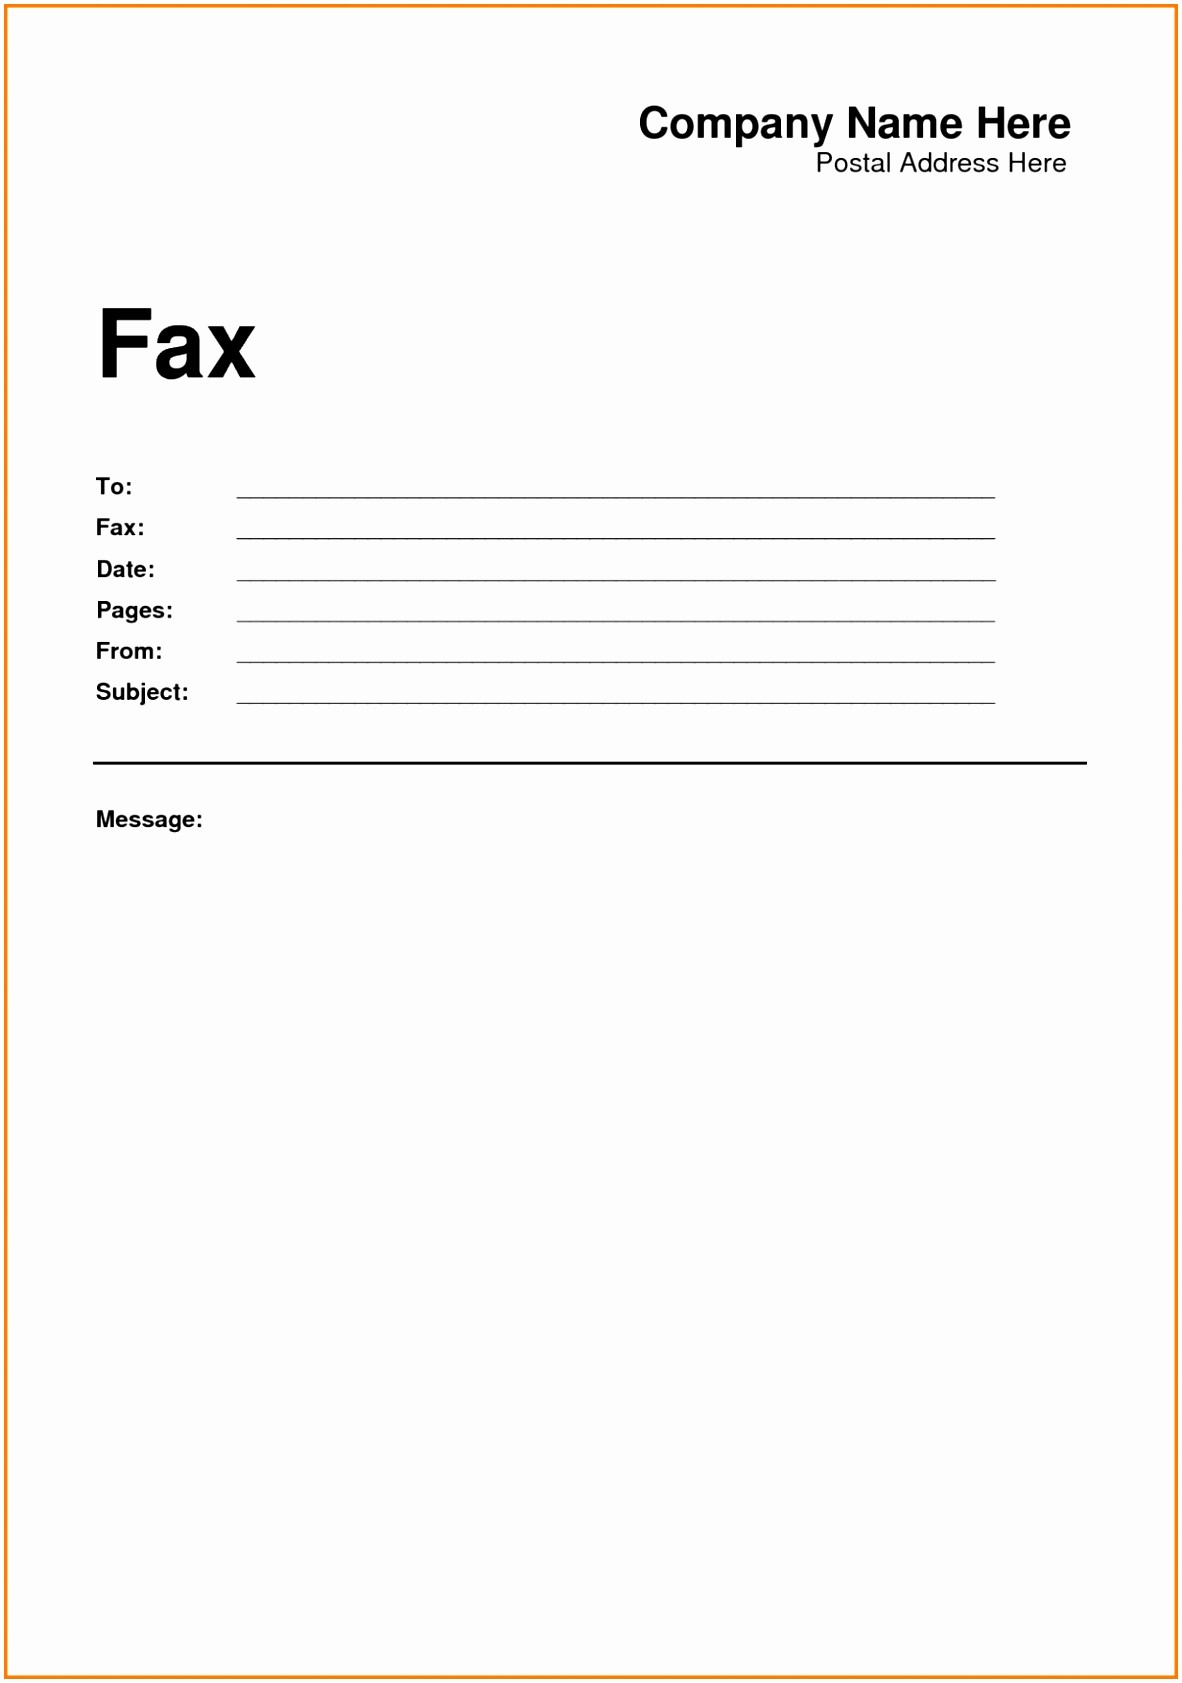 Fax Cover Sheet Pdf format Inspirational Good Covering Letter Example Uk Gseokbinder Design Fax